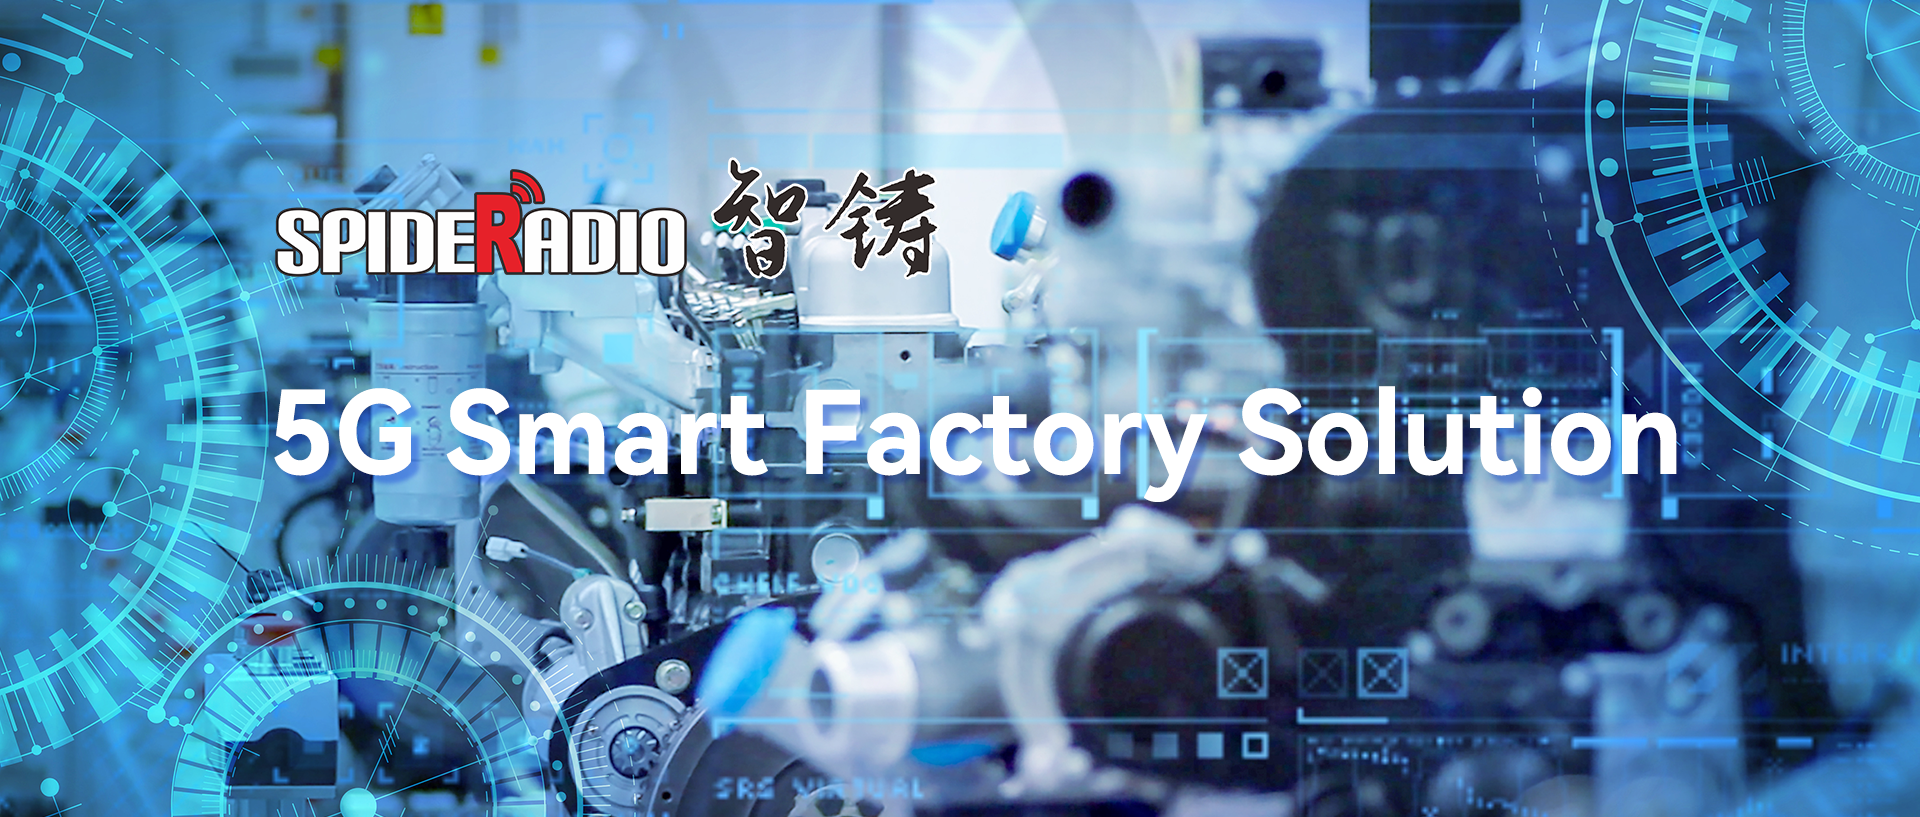 5G Smart Factory Solution Introduction